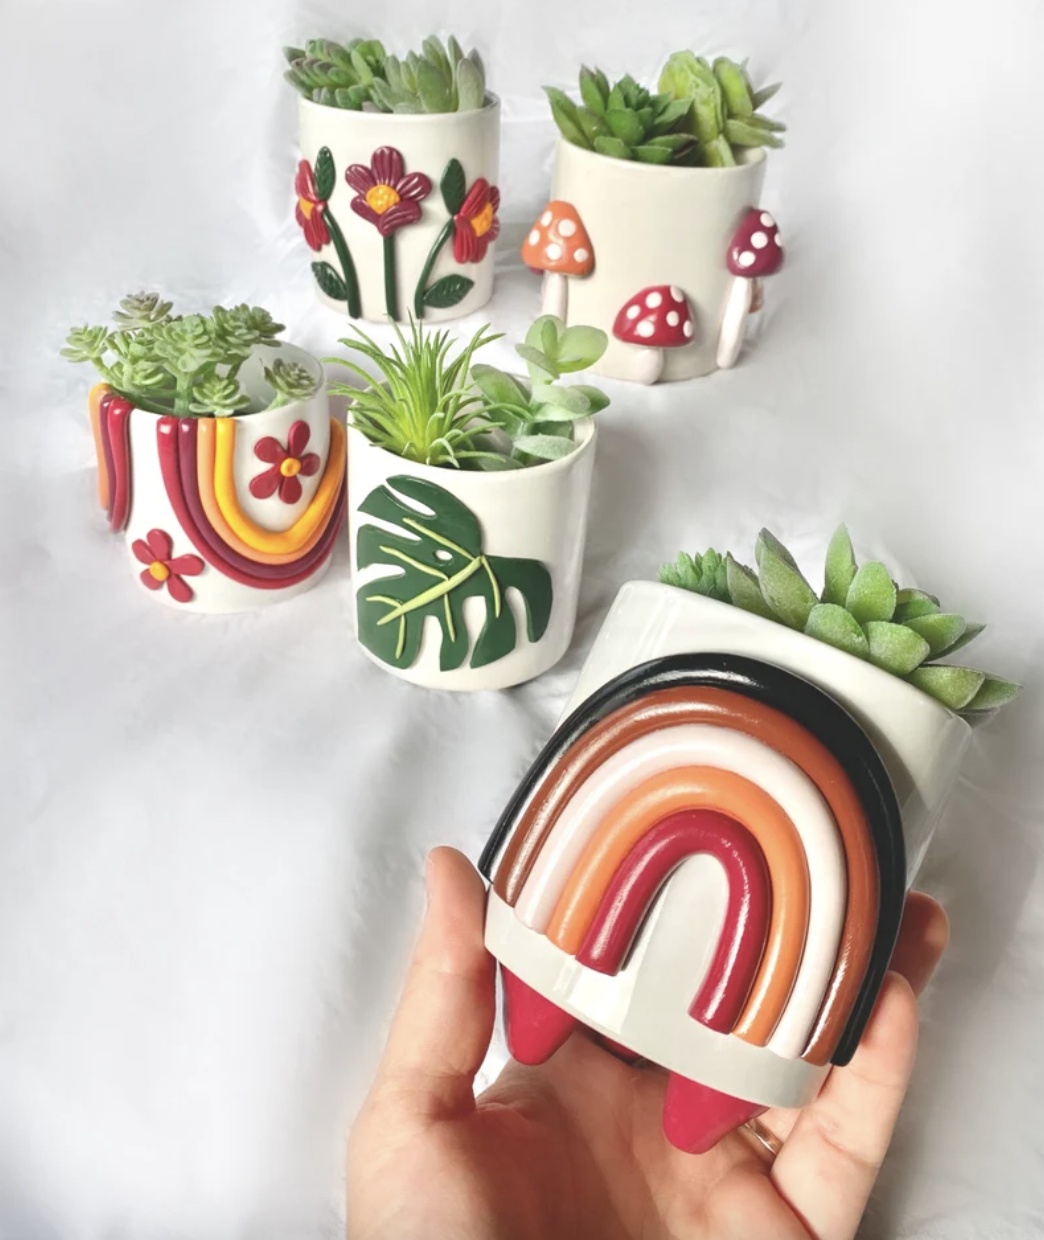 A person holds up one of five handmade planters with cool 3d designs on them